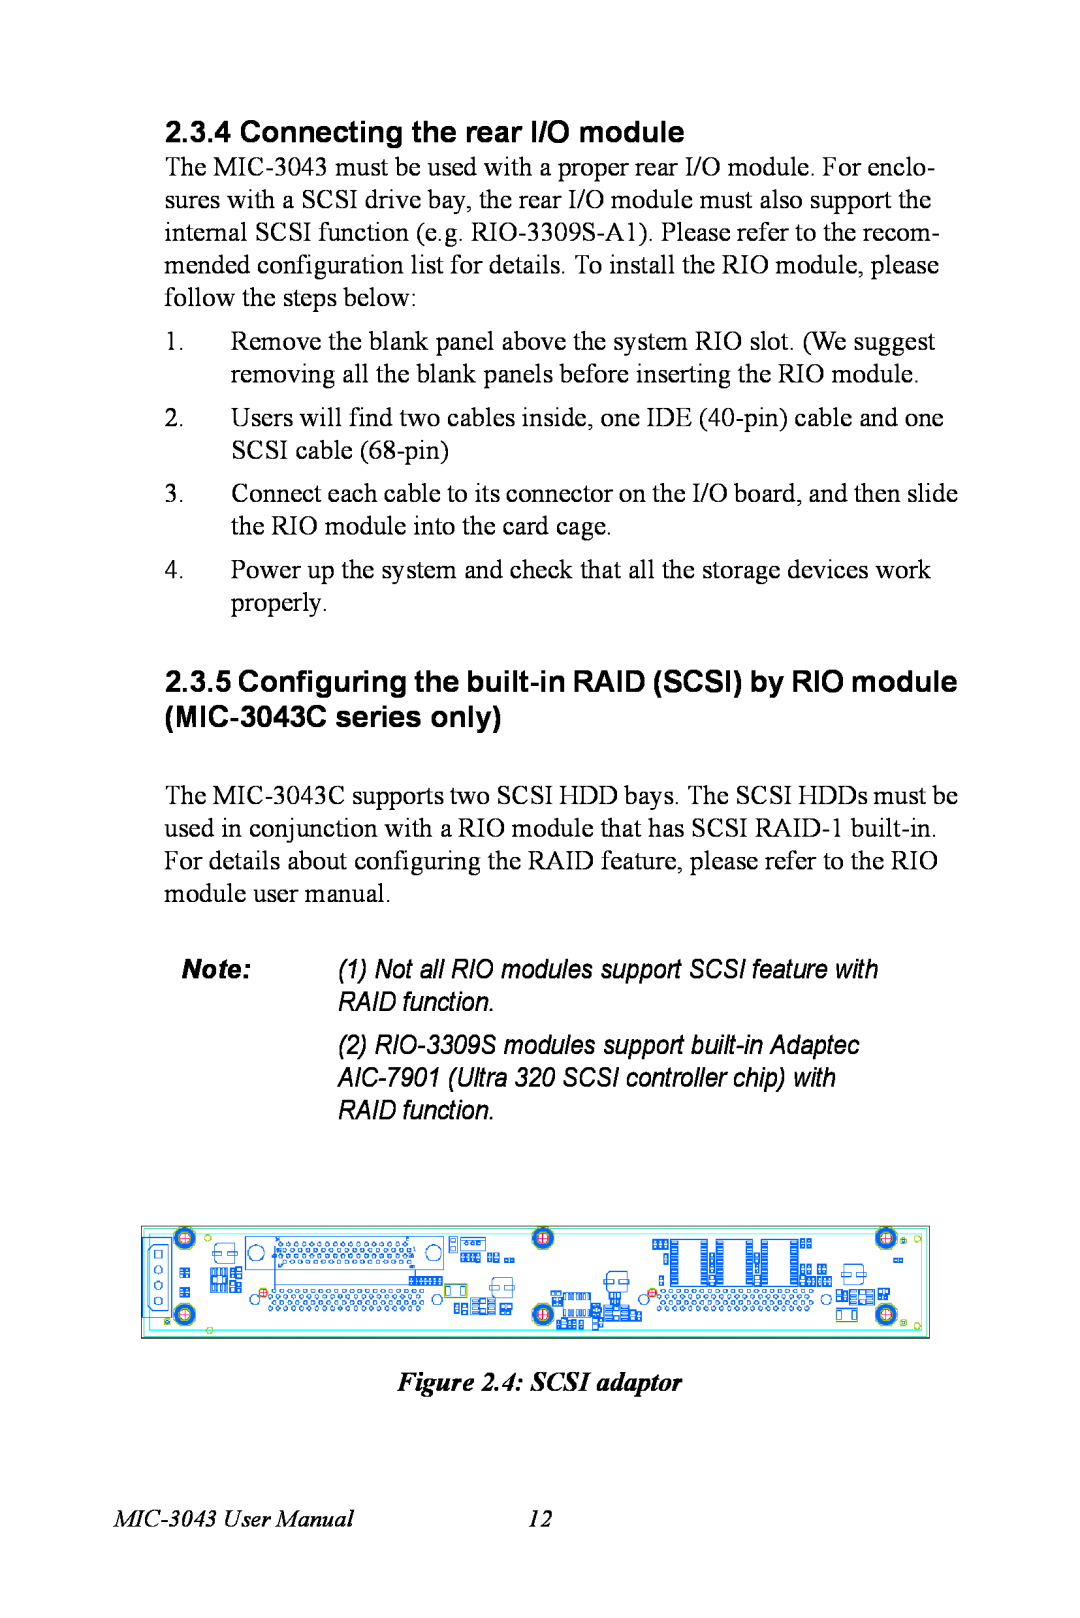 Advantech MIC-3043 Connecting the rear I/O module, Note 1 Not all RIO modules support SCSI feature with RAID function 